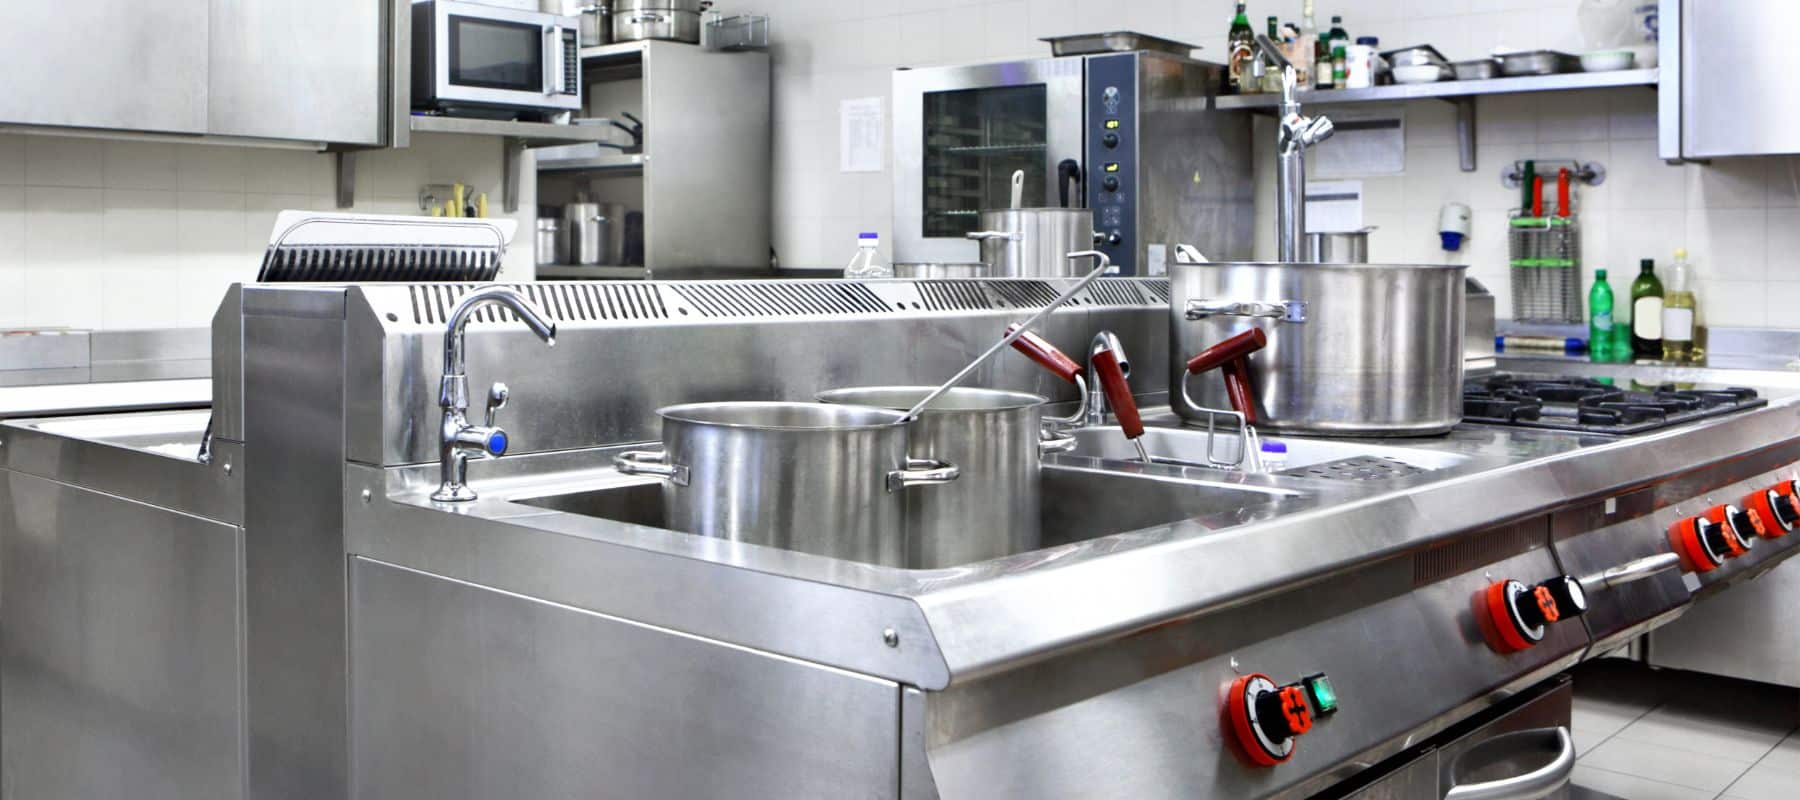 reverse osmosis system in a commercial kitchen